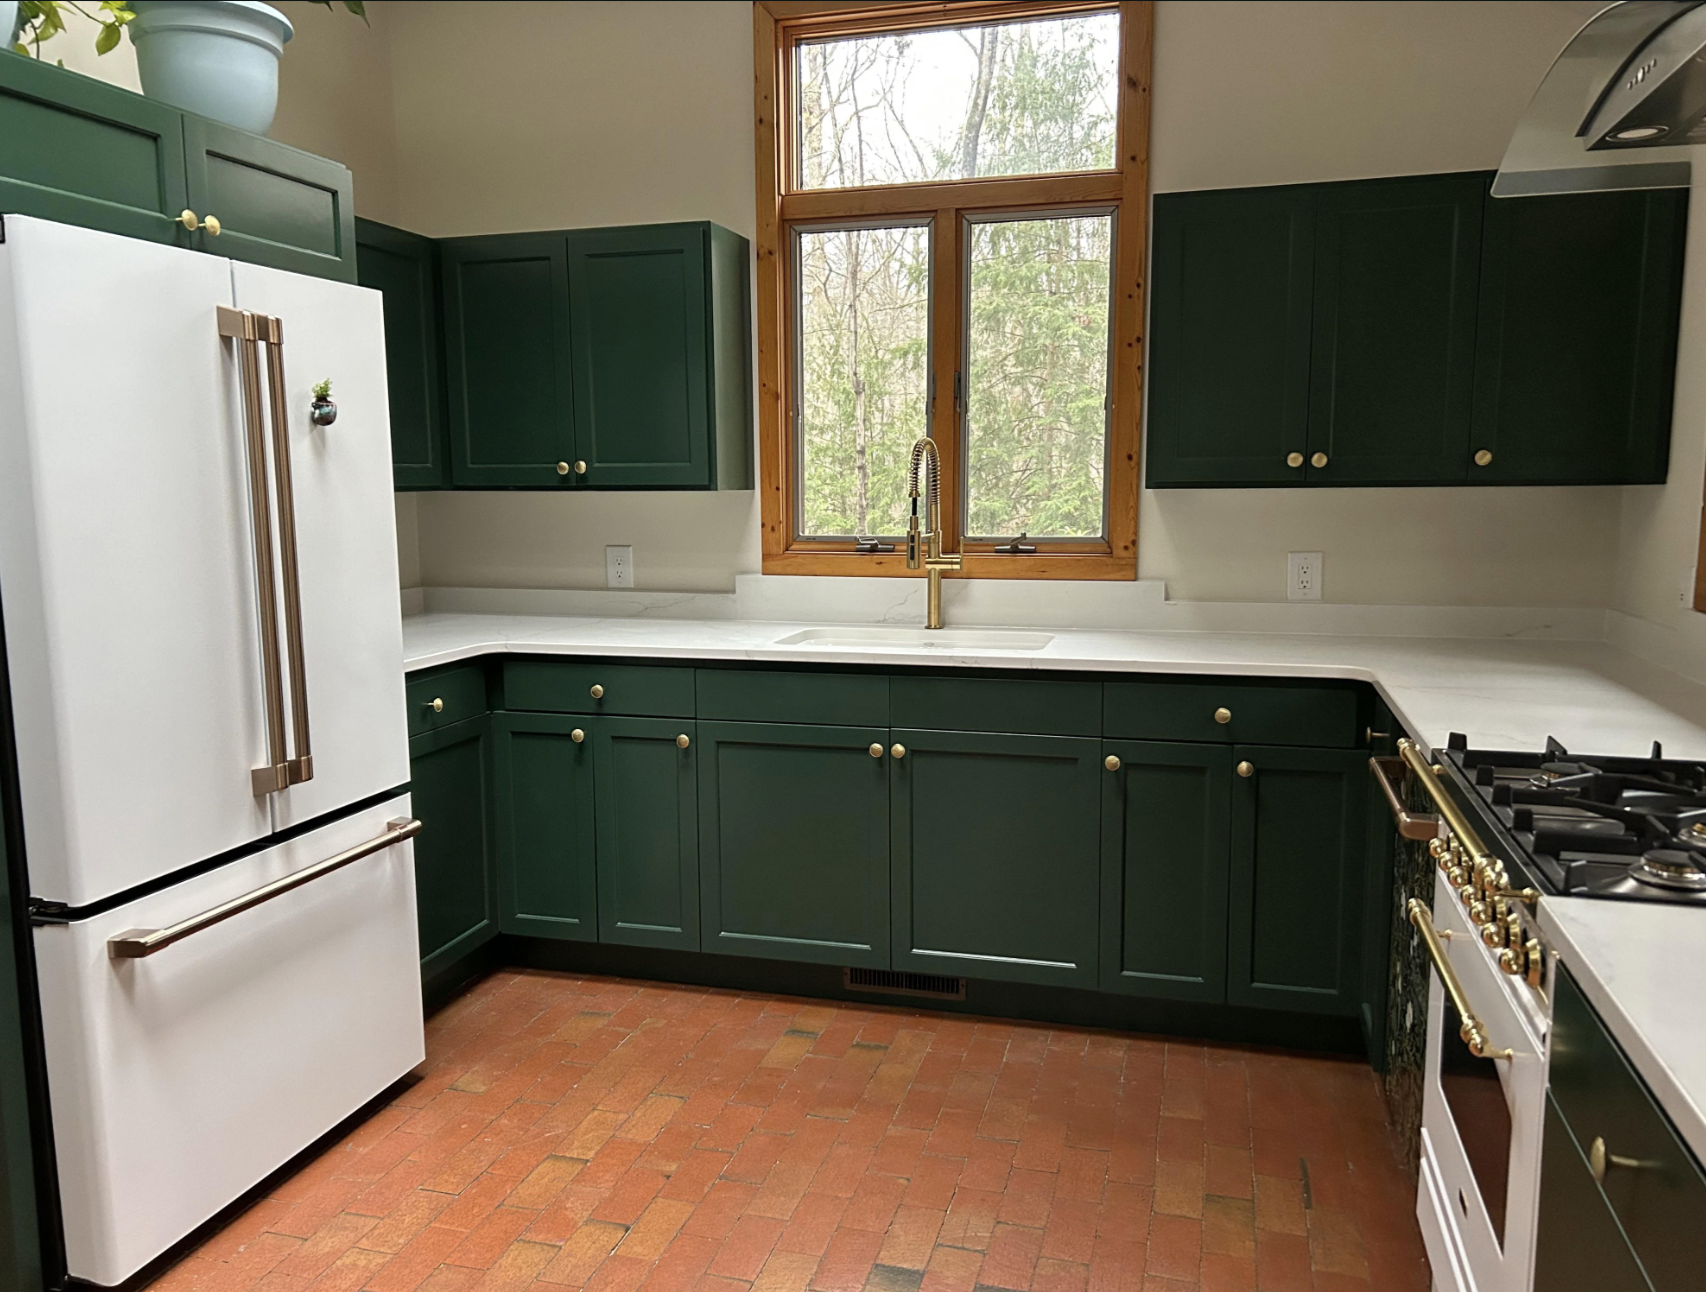 A kitchen has newly painted cabinets